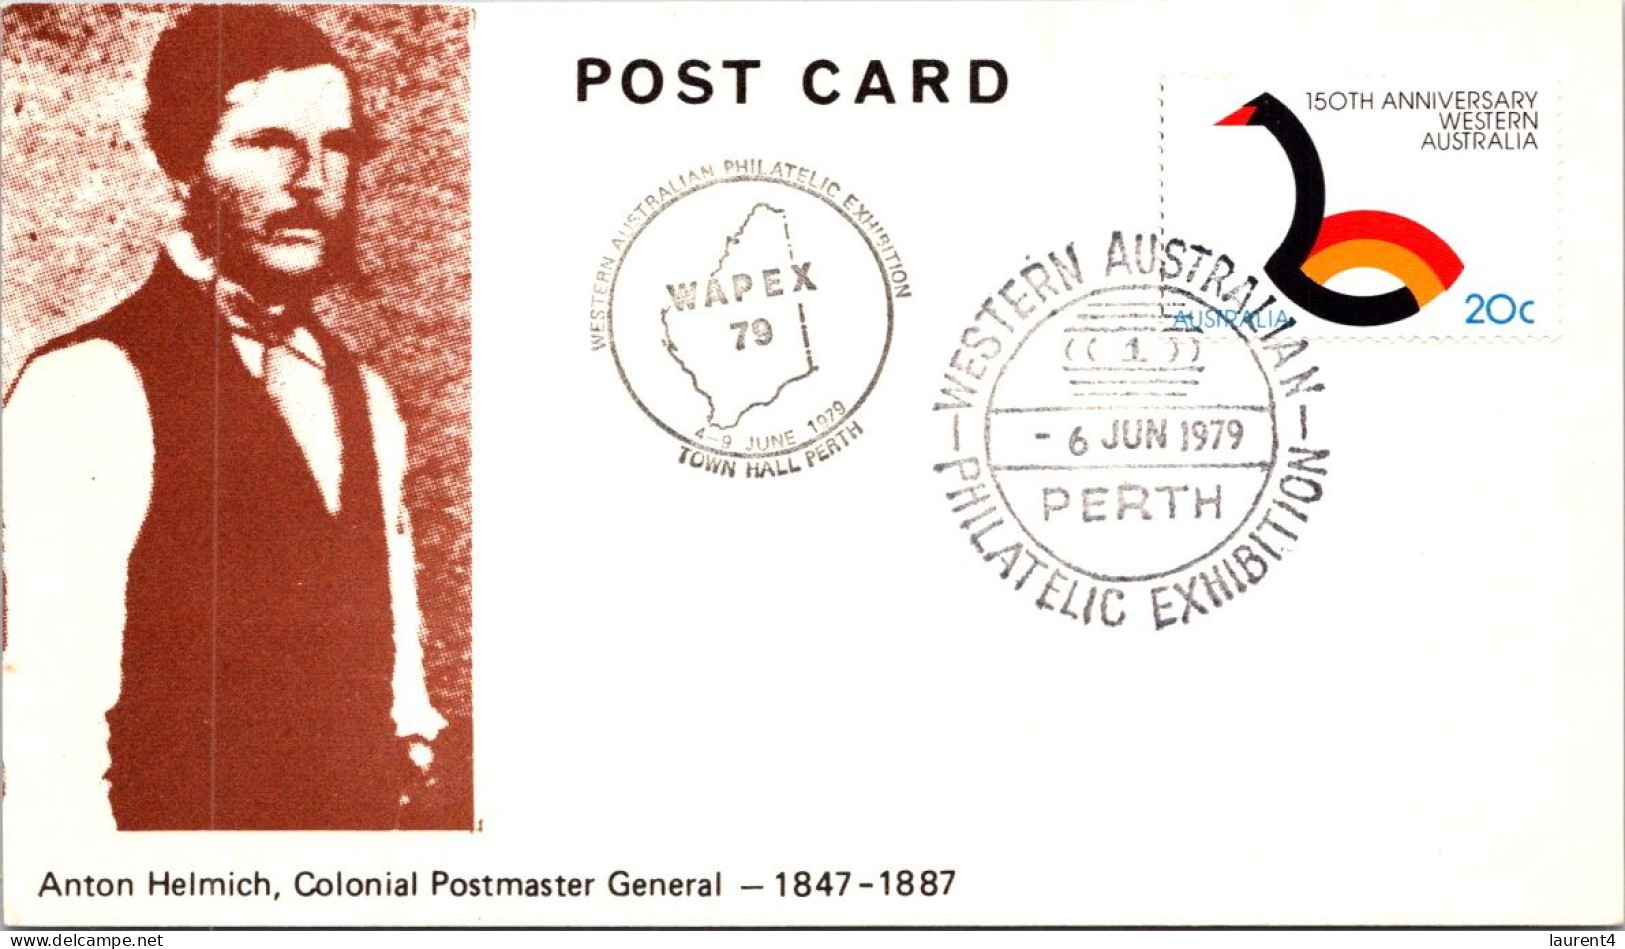 26-4-2024 (4 Y 6) Centenary Of The First Postcard Issued In Western Australia (6-6-1879) 6-6-1979 (1 Card) - Poste & Postini